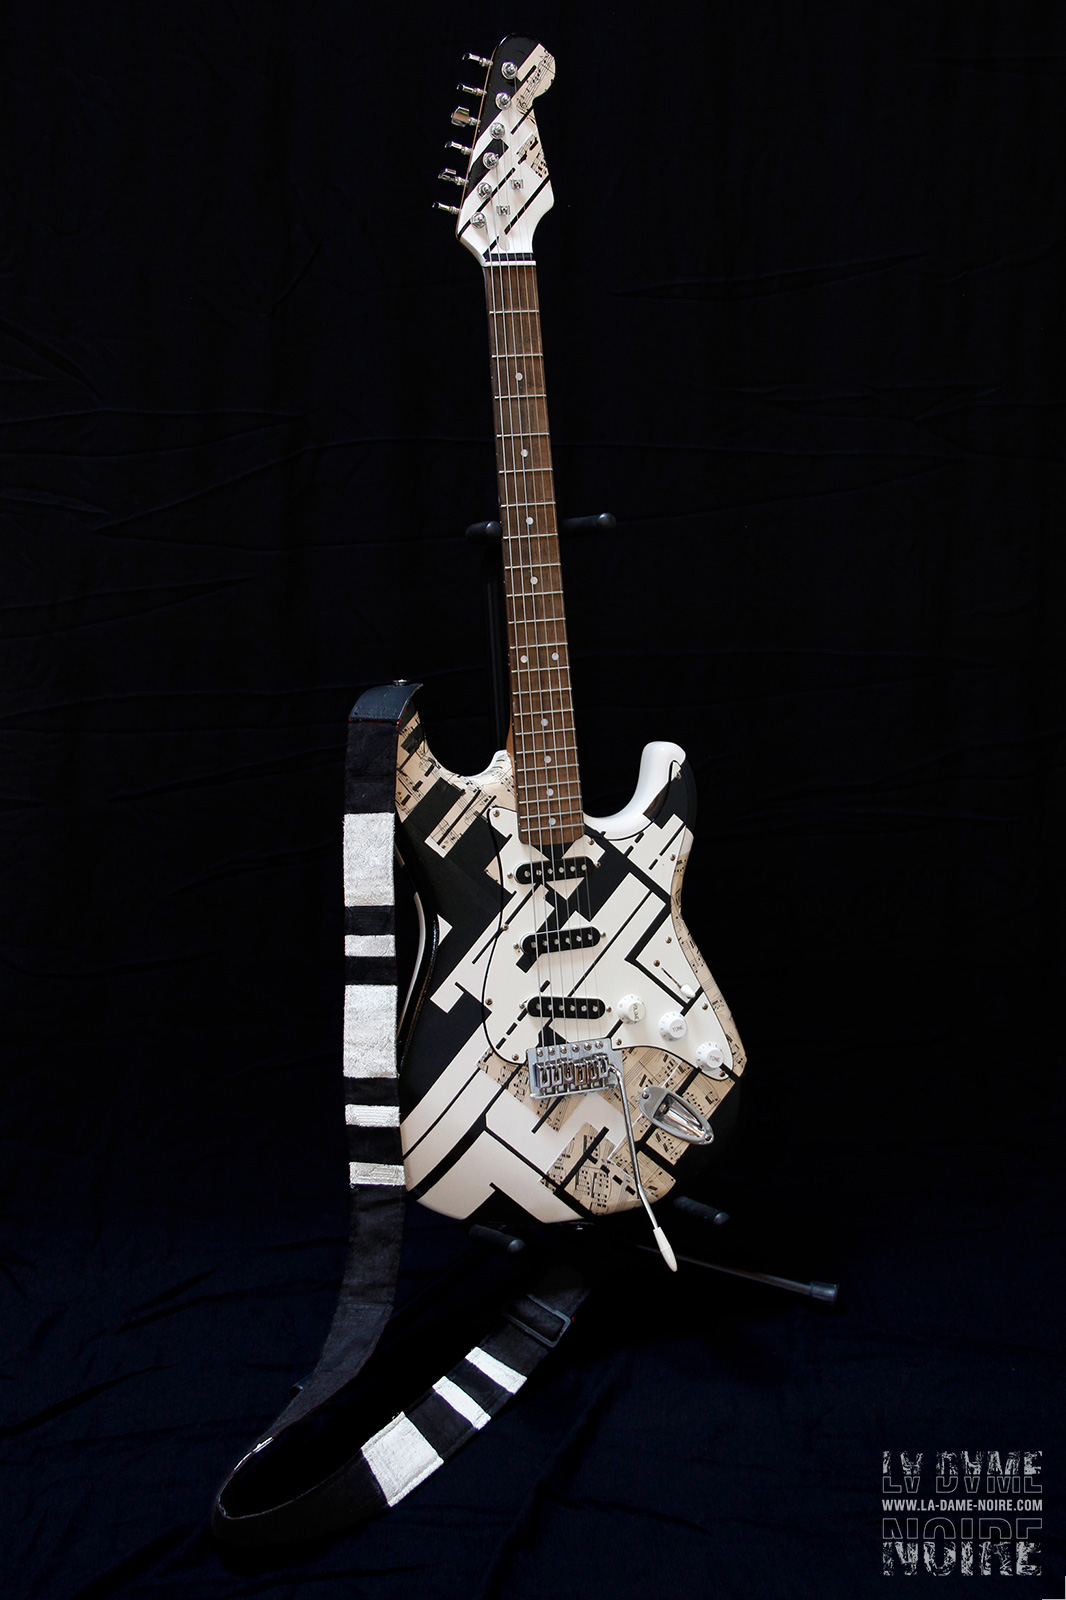 Electric guitar painted in black and white